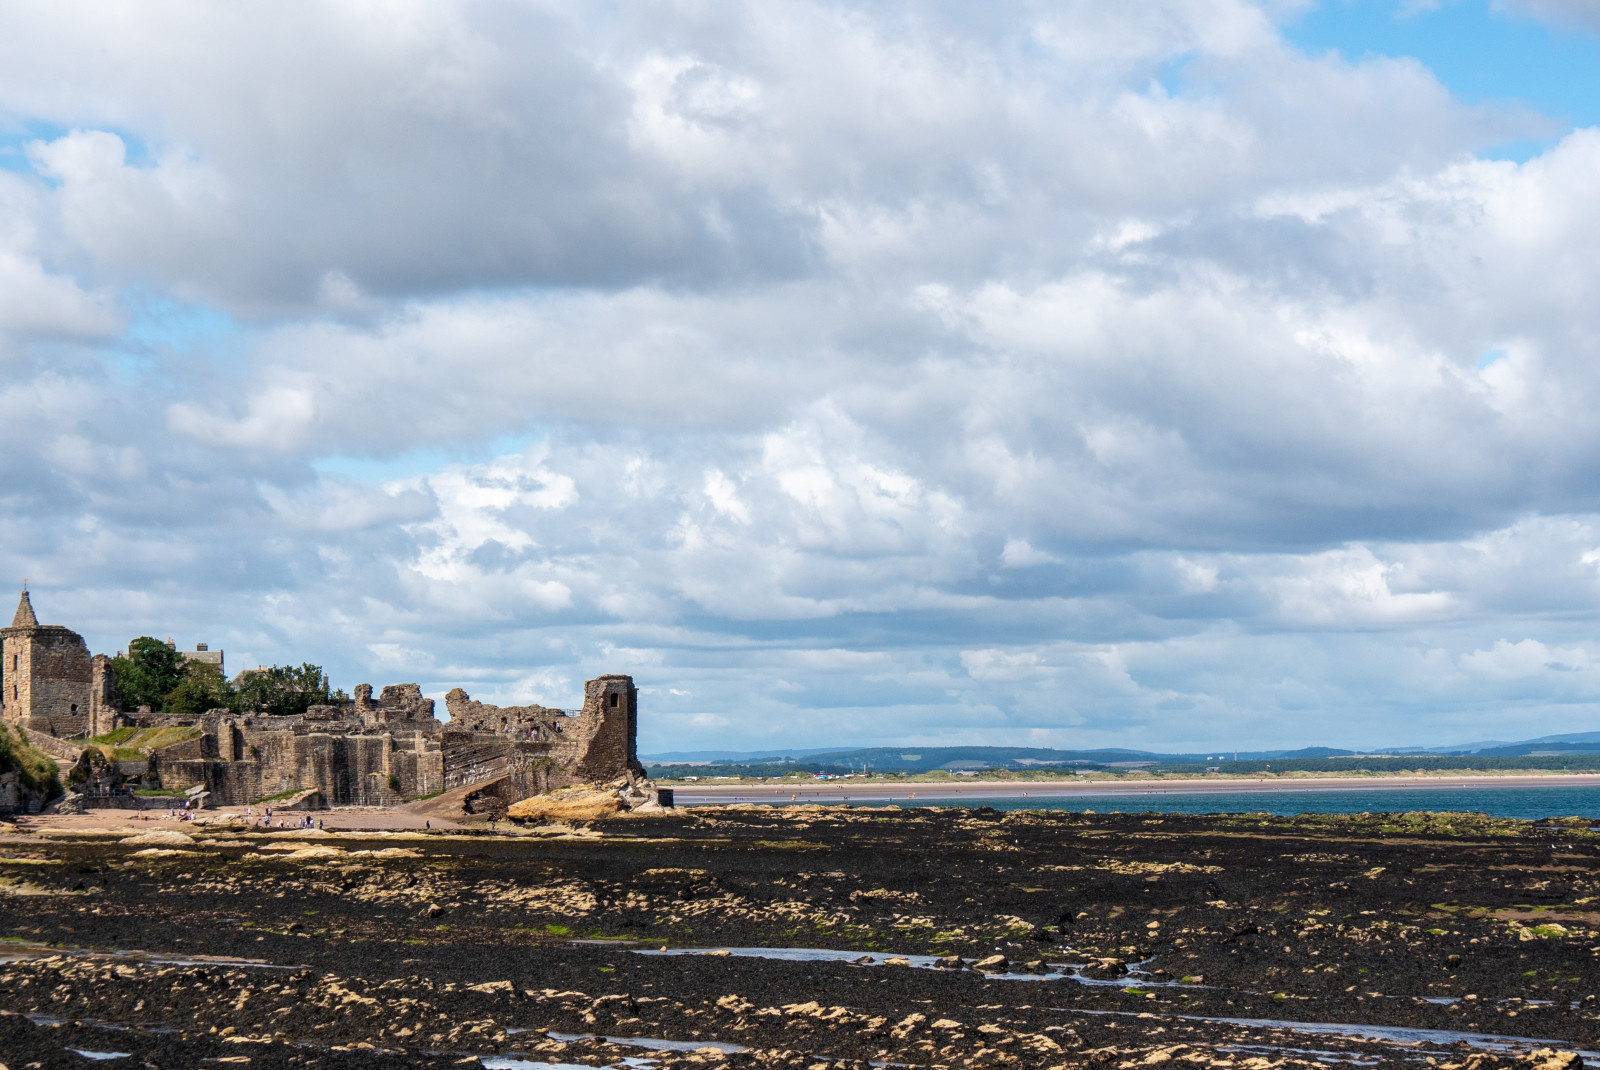 Tan St. Andrews castle ruins on a black sand beach with blue water and green hills in the distance